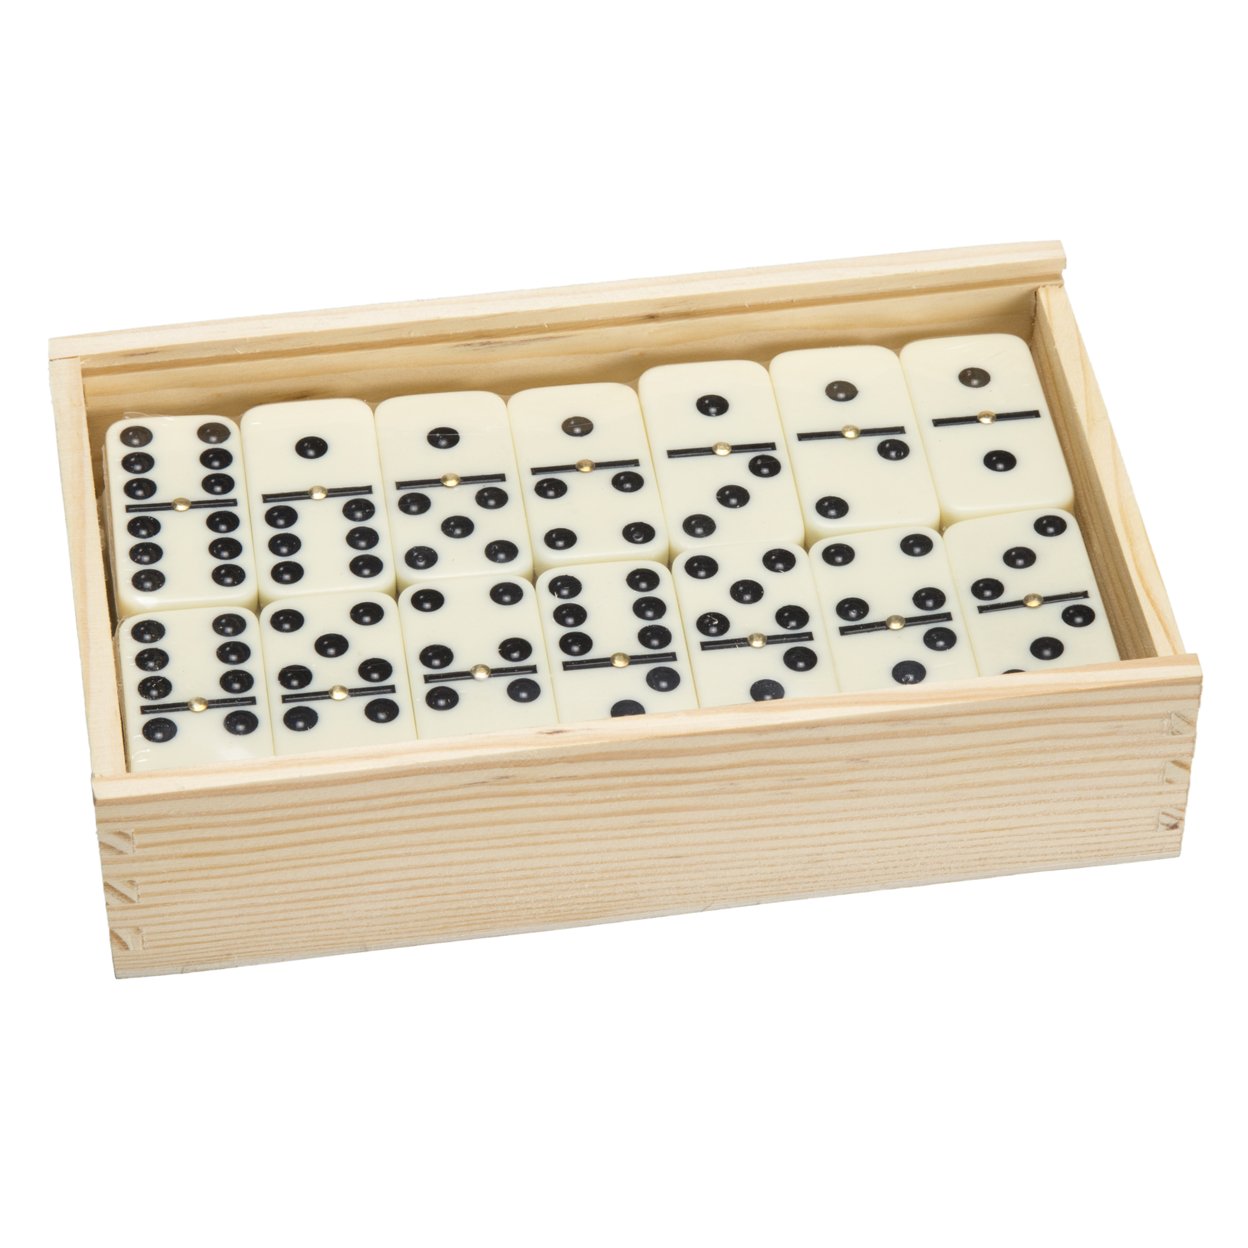 Premium Set Of 55 Double Nine Dominoes With Wood Case Center Pip For Easy Mix And Flip 1 - 9